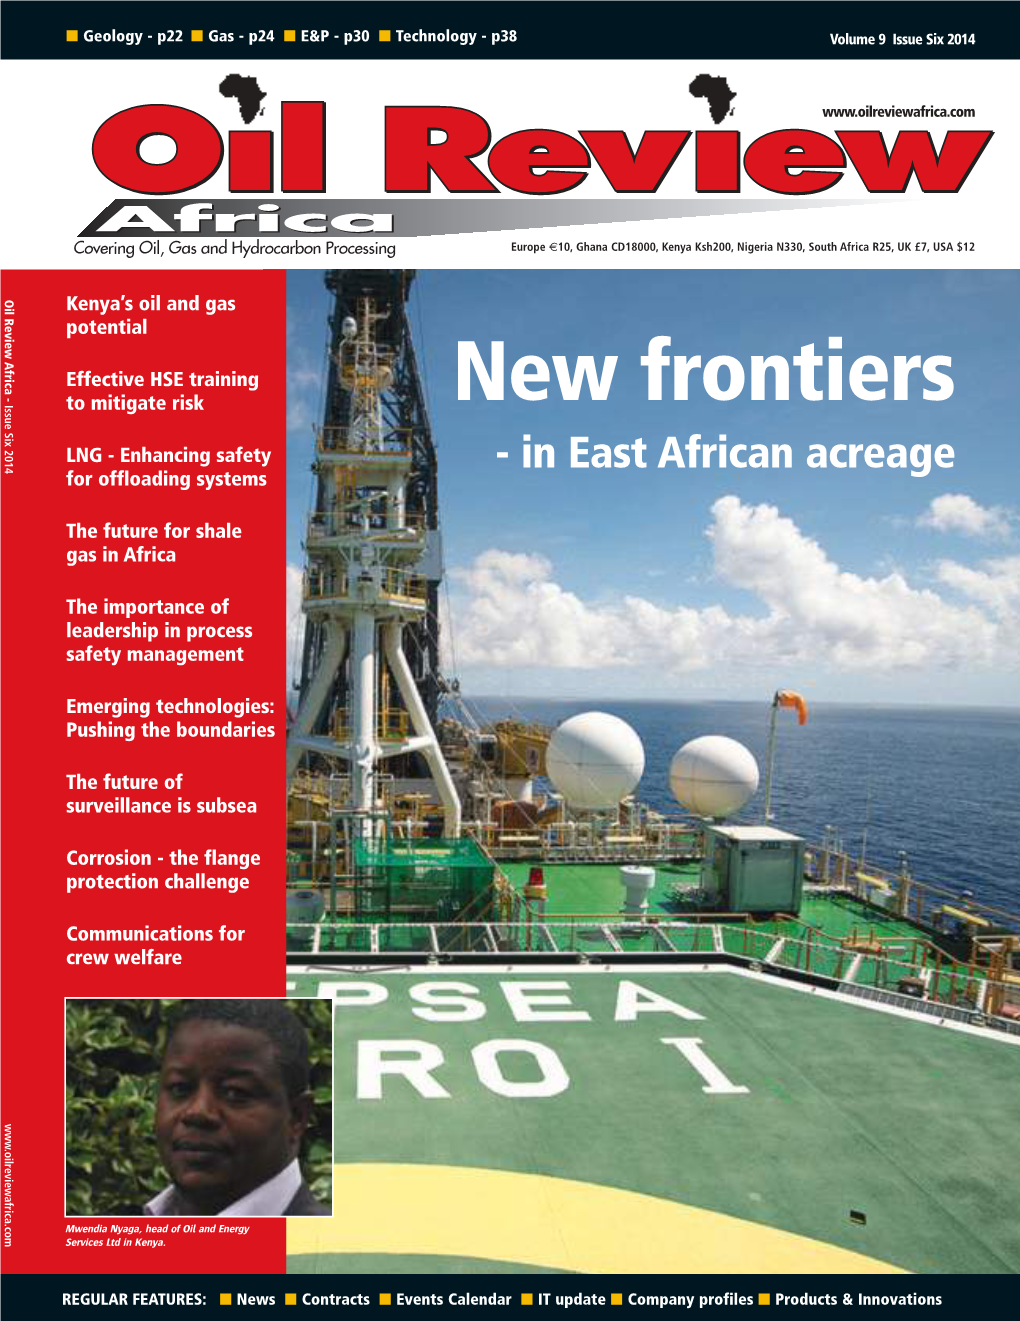 New Frontiers LNG - Enhancing Safety - in East African Acreage for Offloading Systems